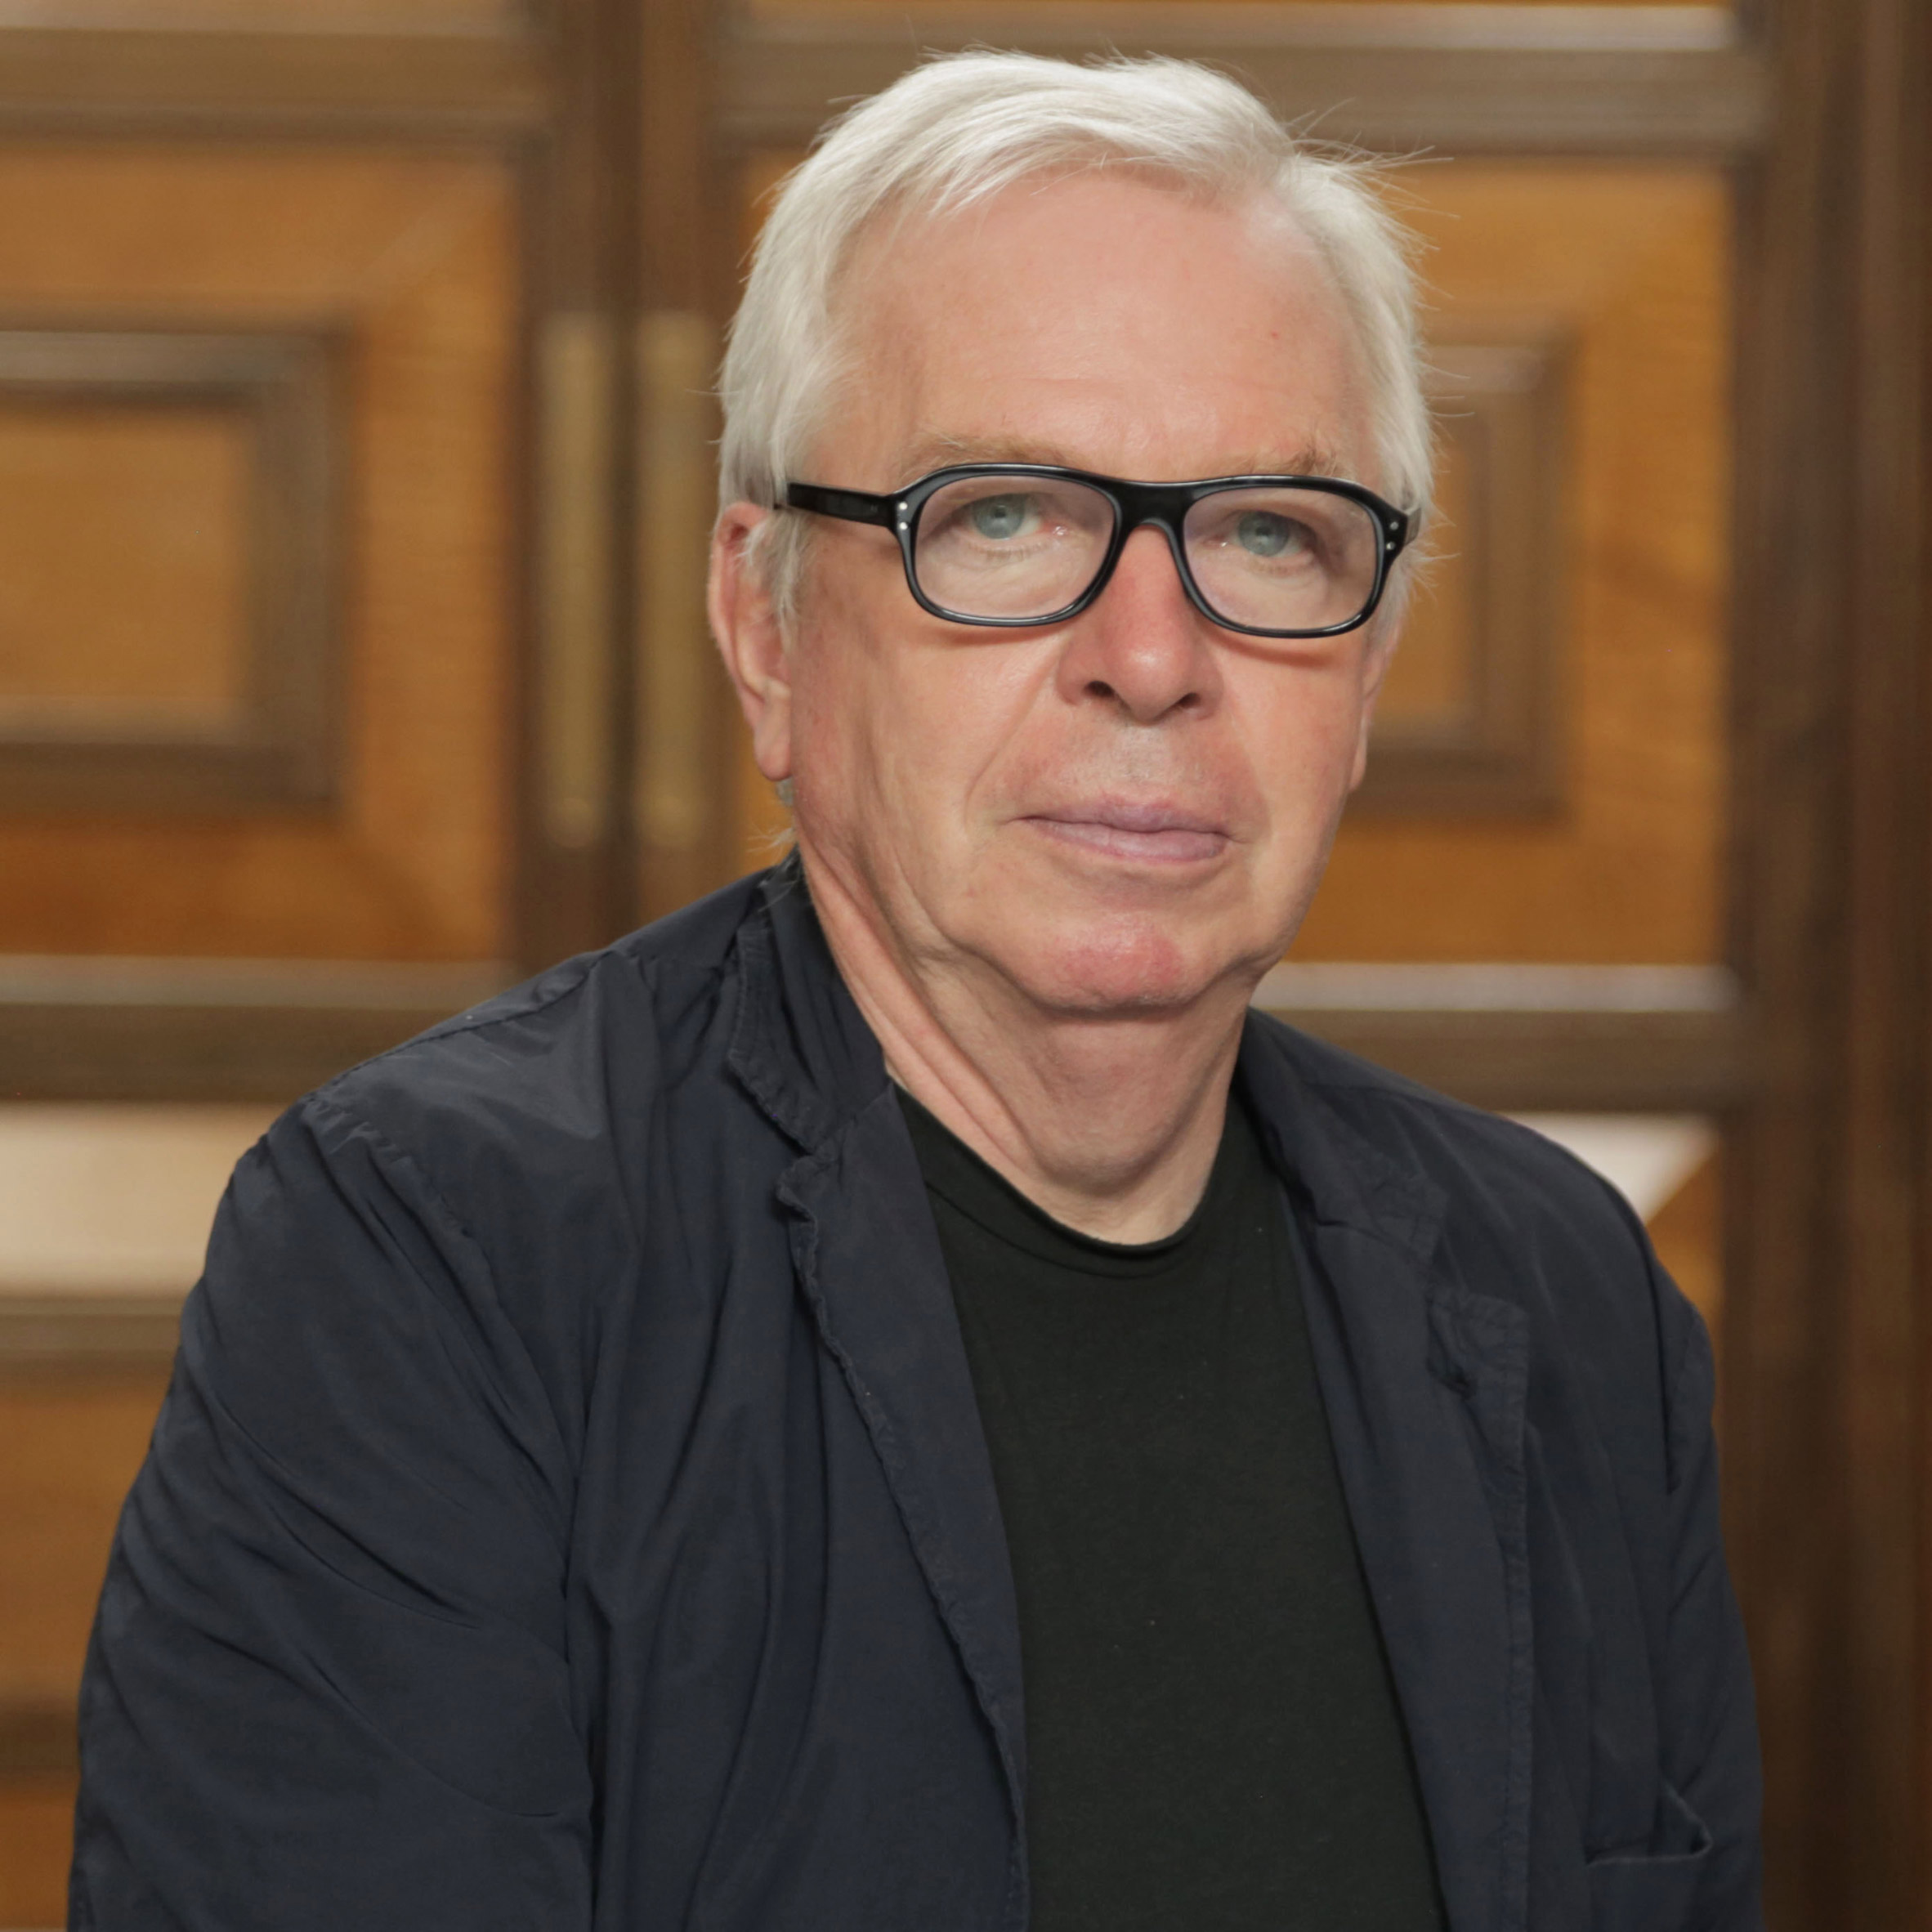 "I feel like a bit of a fake" says David Chipperfield in Dezeen's latest podcast